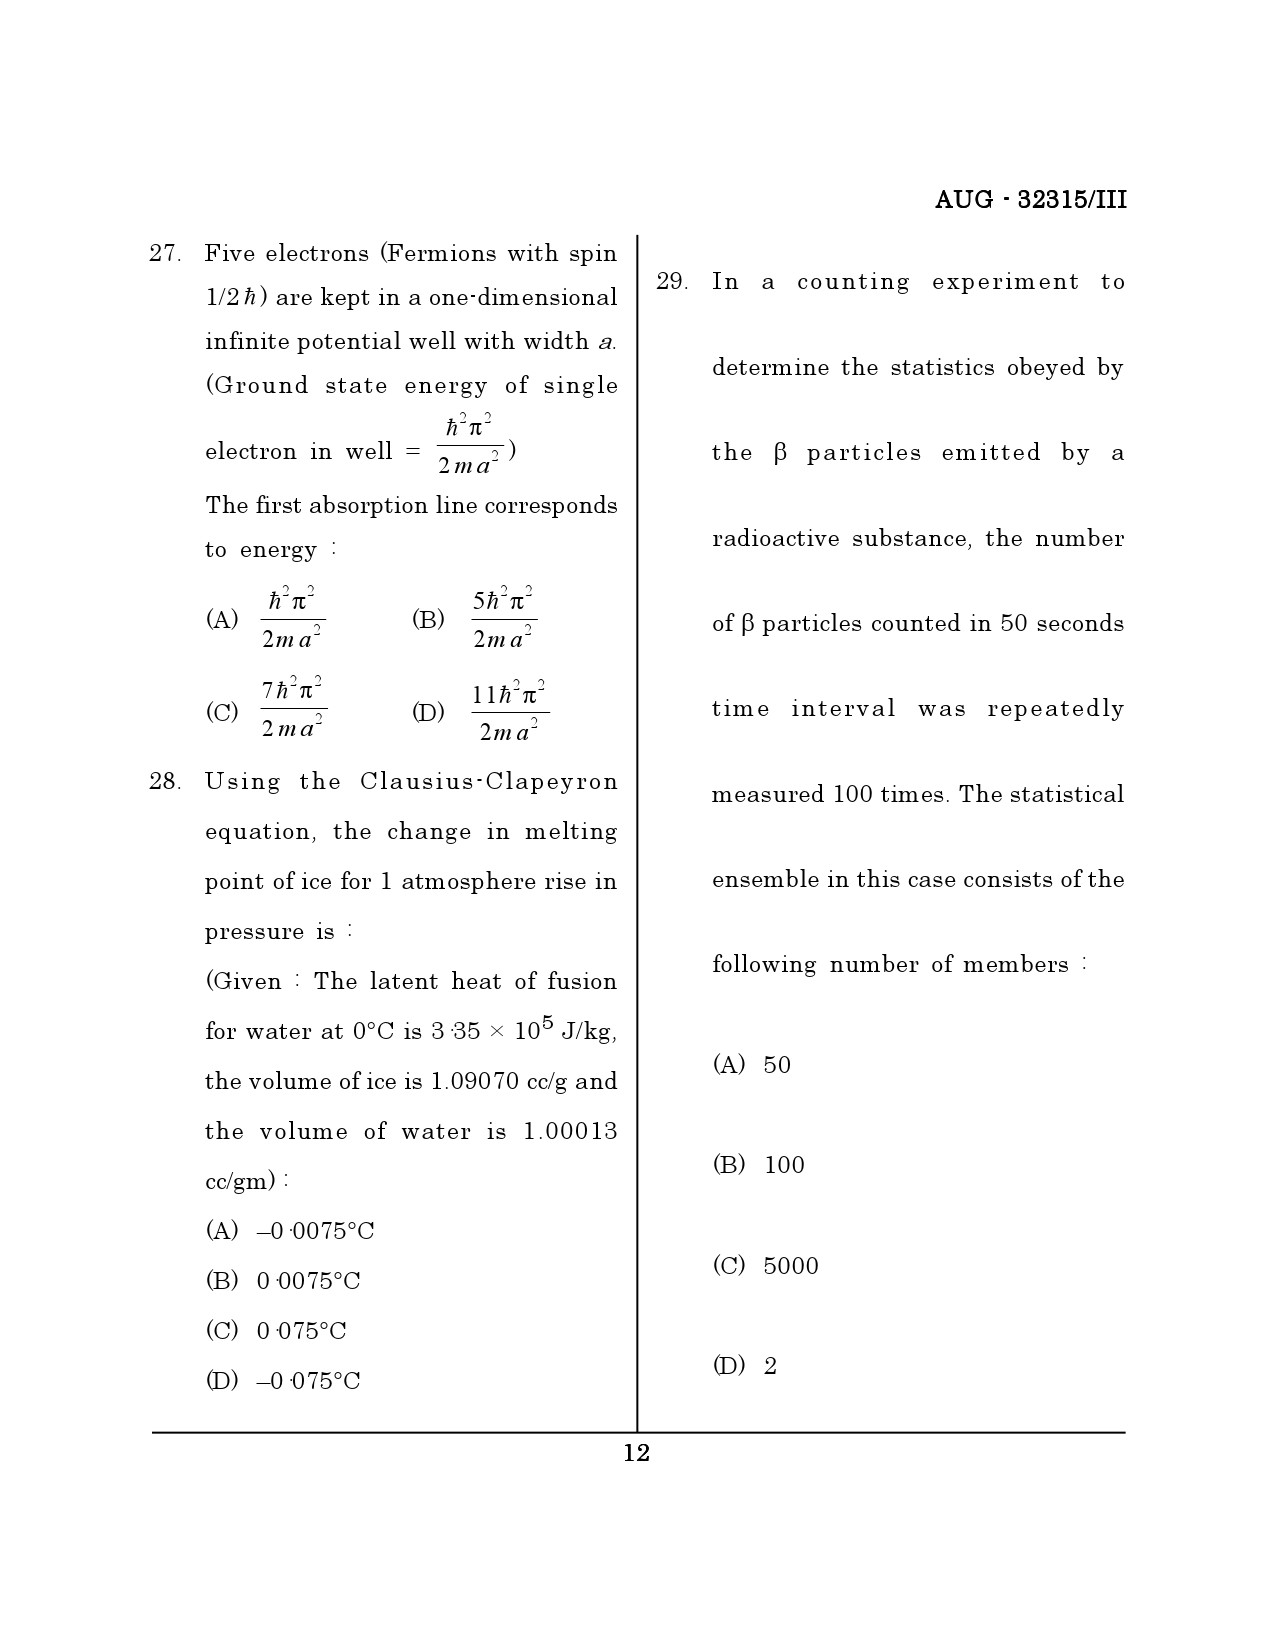 Maharashtra SET Physical Science Question Paper III August 2015 11